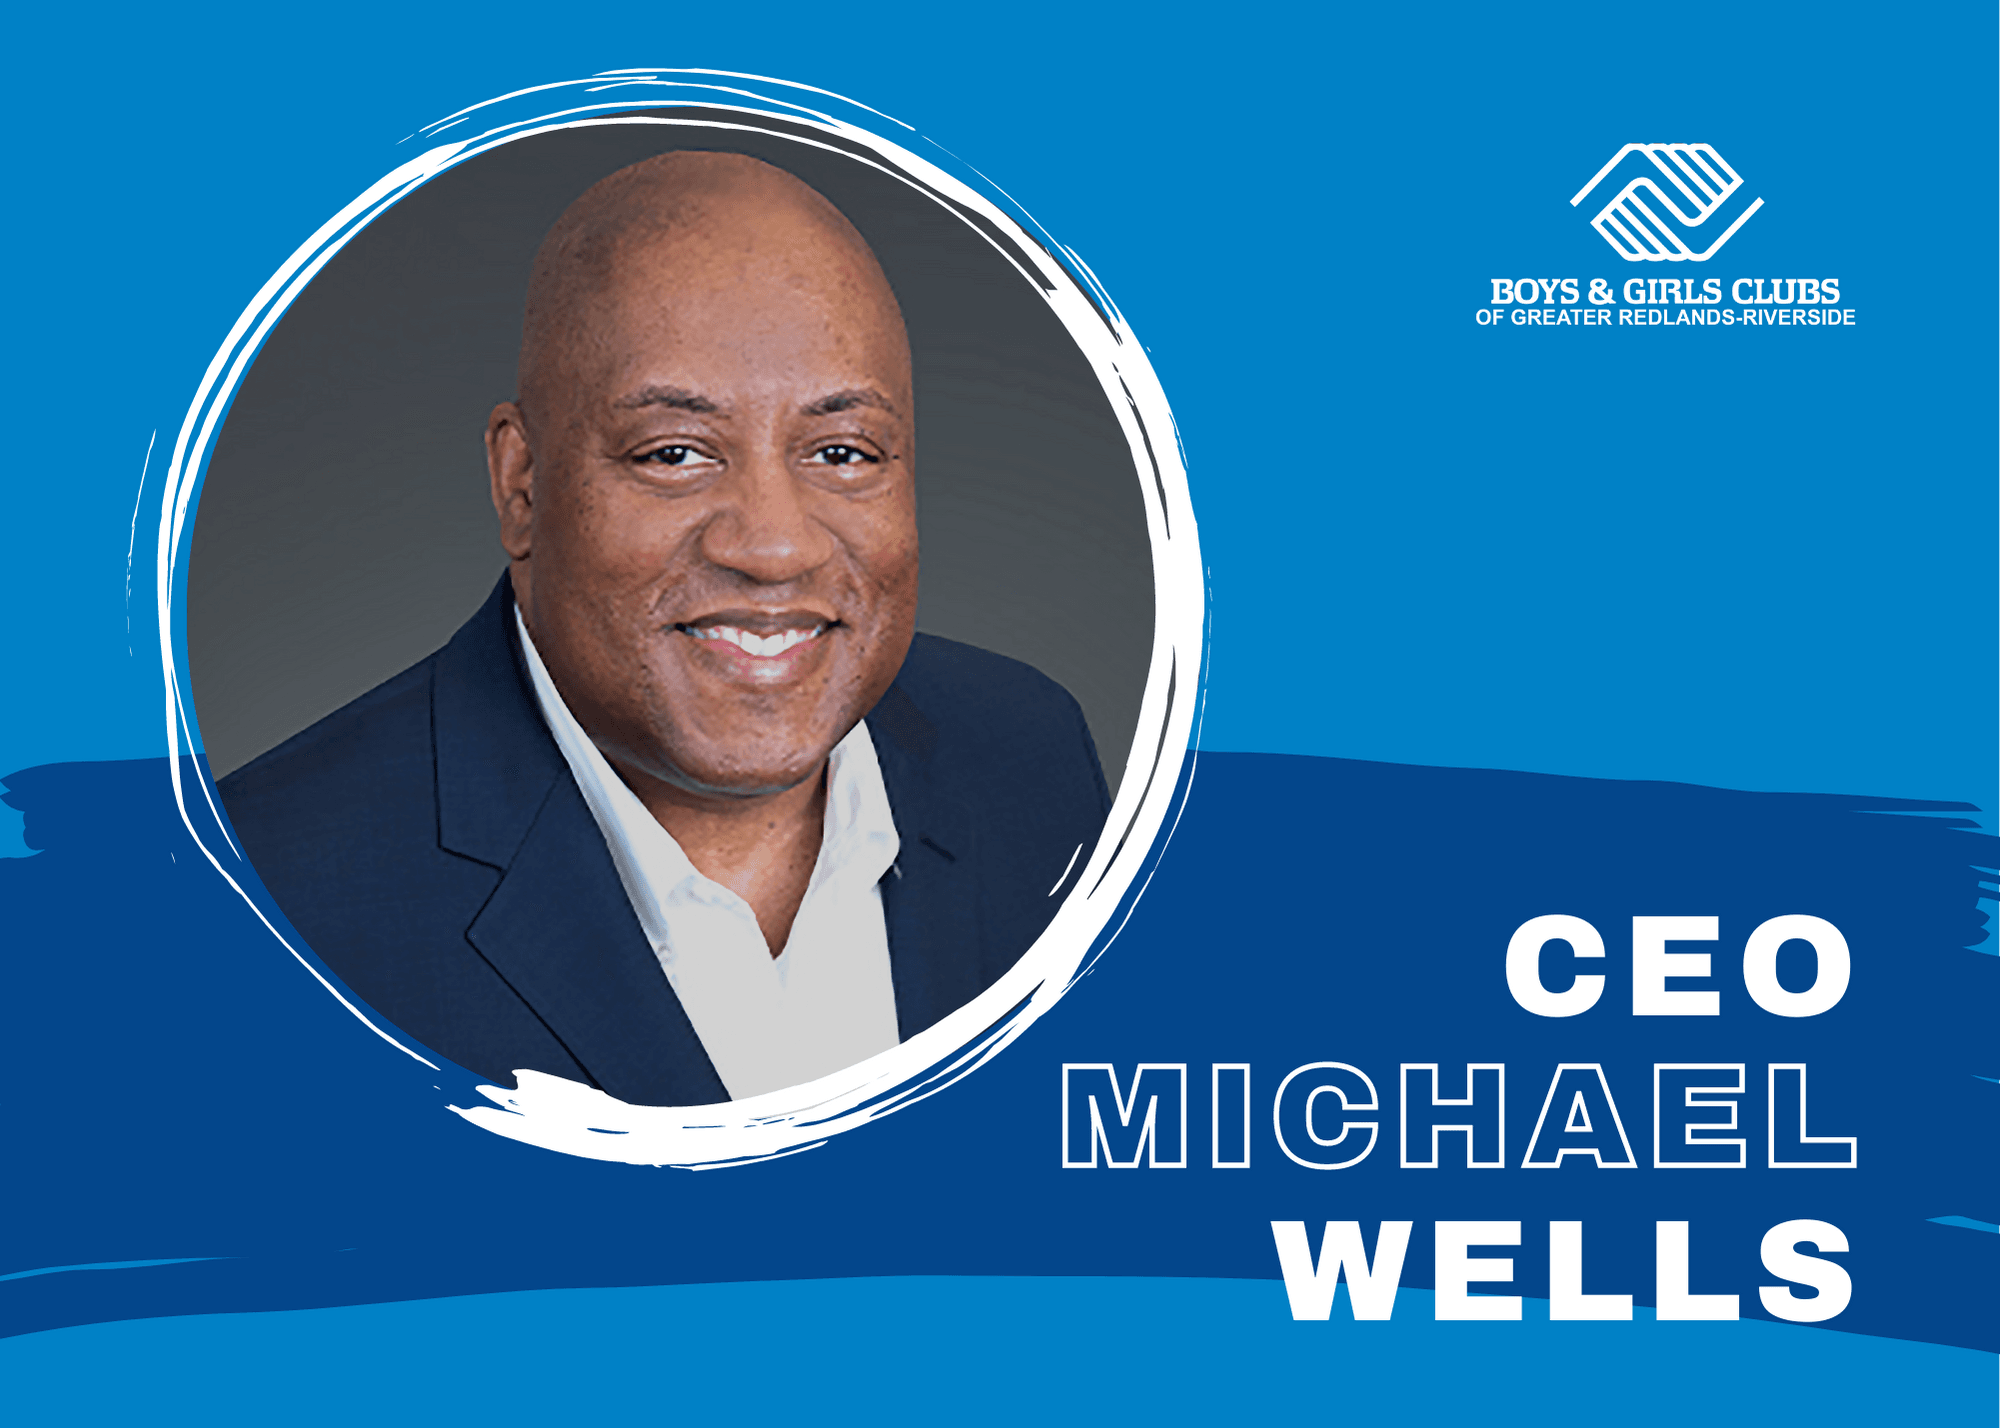 Introducing Michael Wells, CEO of Boys & Girls Clubs of Greater Redlands-Riverside